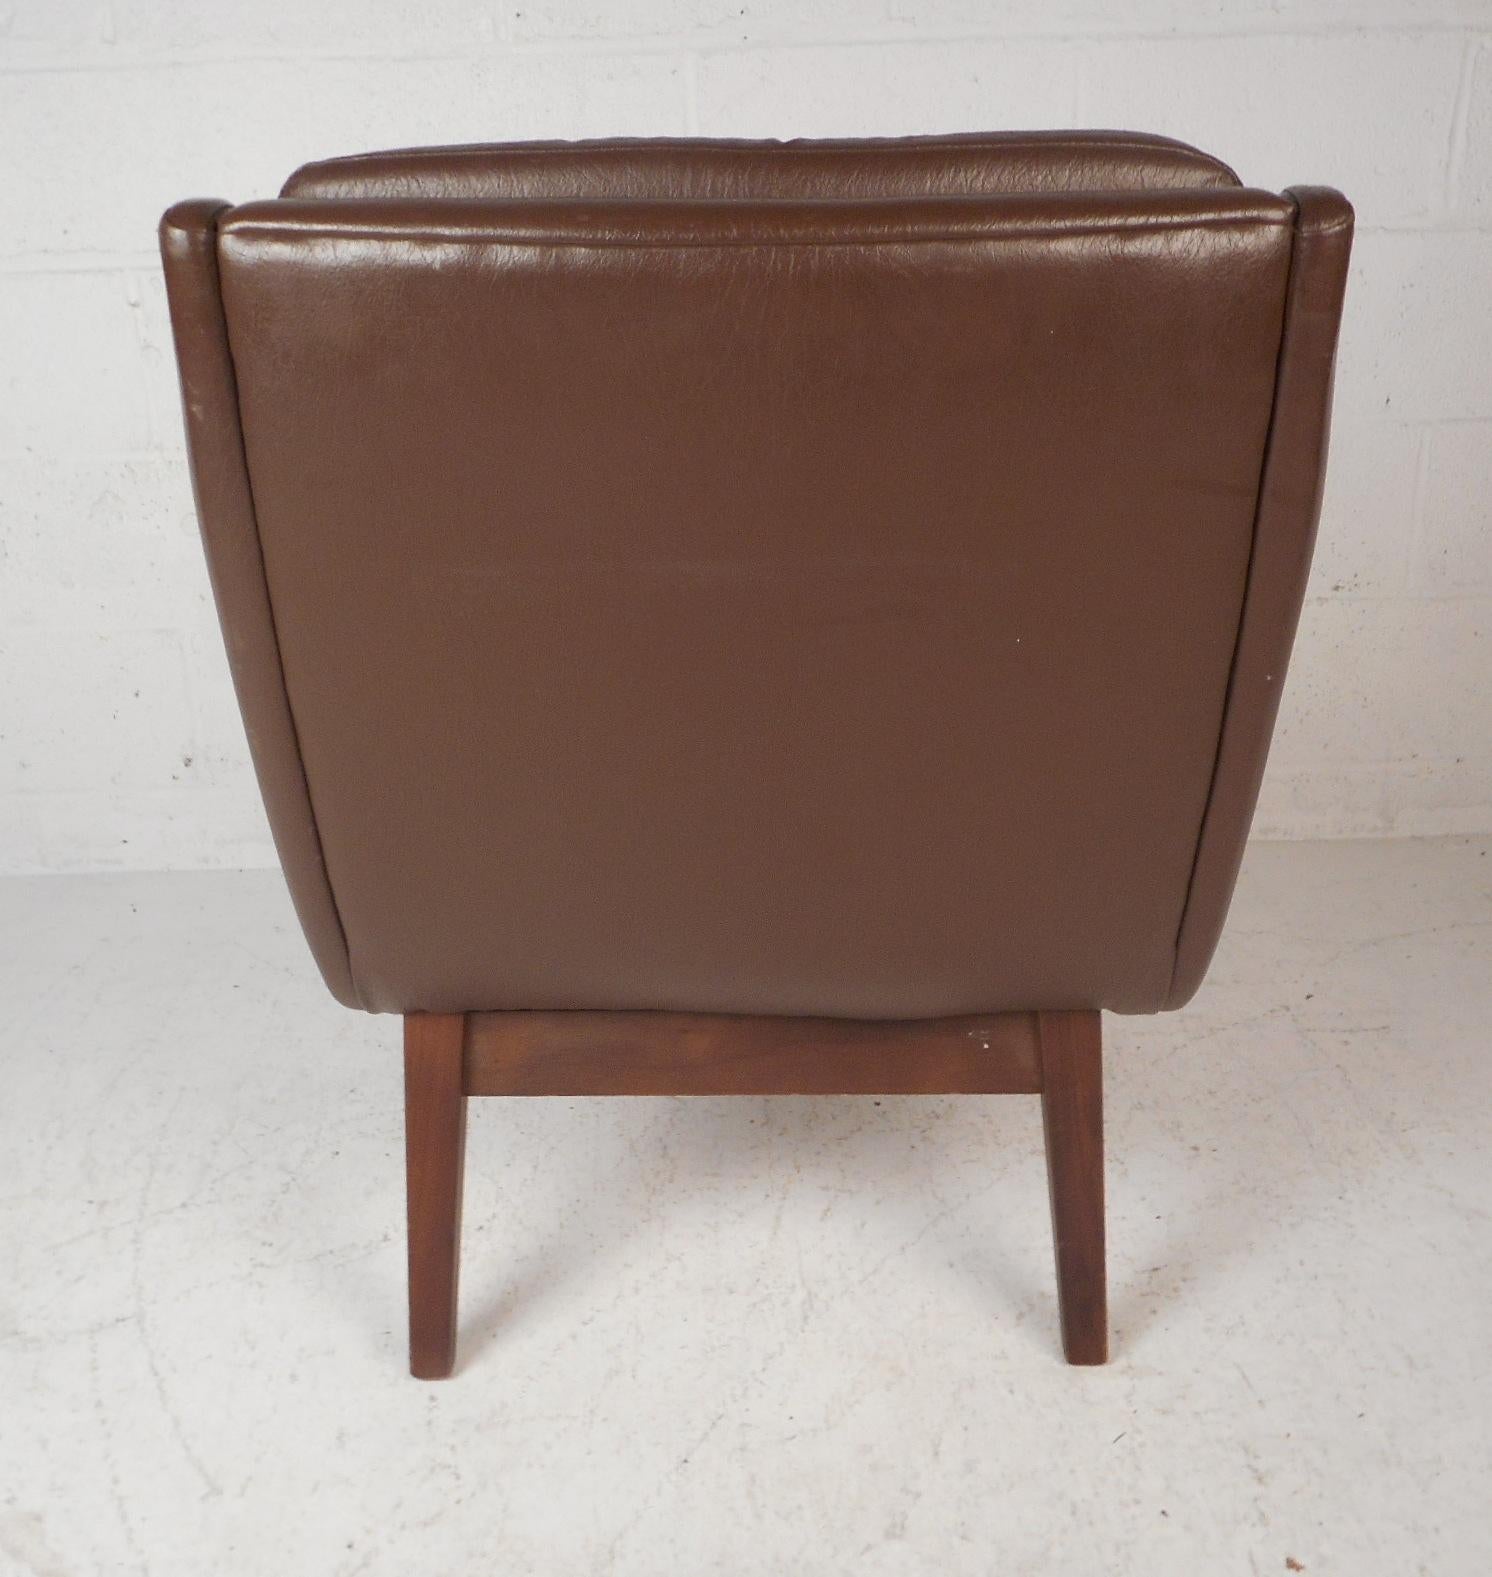 Midcentury Modern Lounge Chair In Good Condition For Sale In Brooklyn, NY